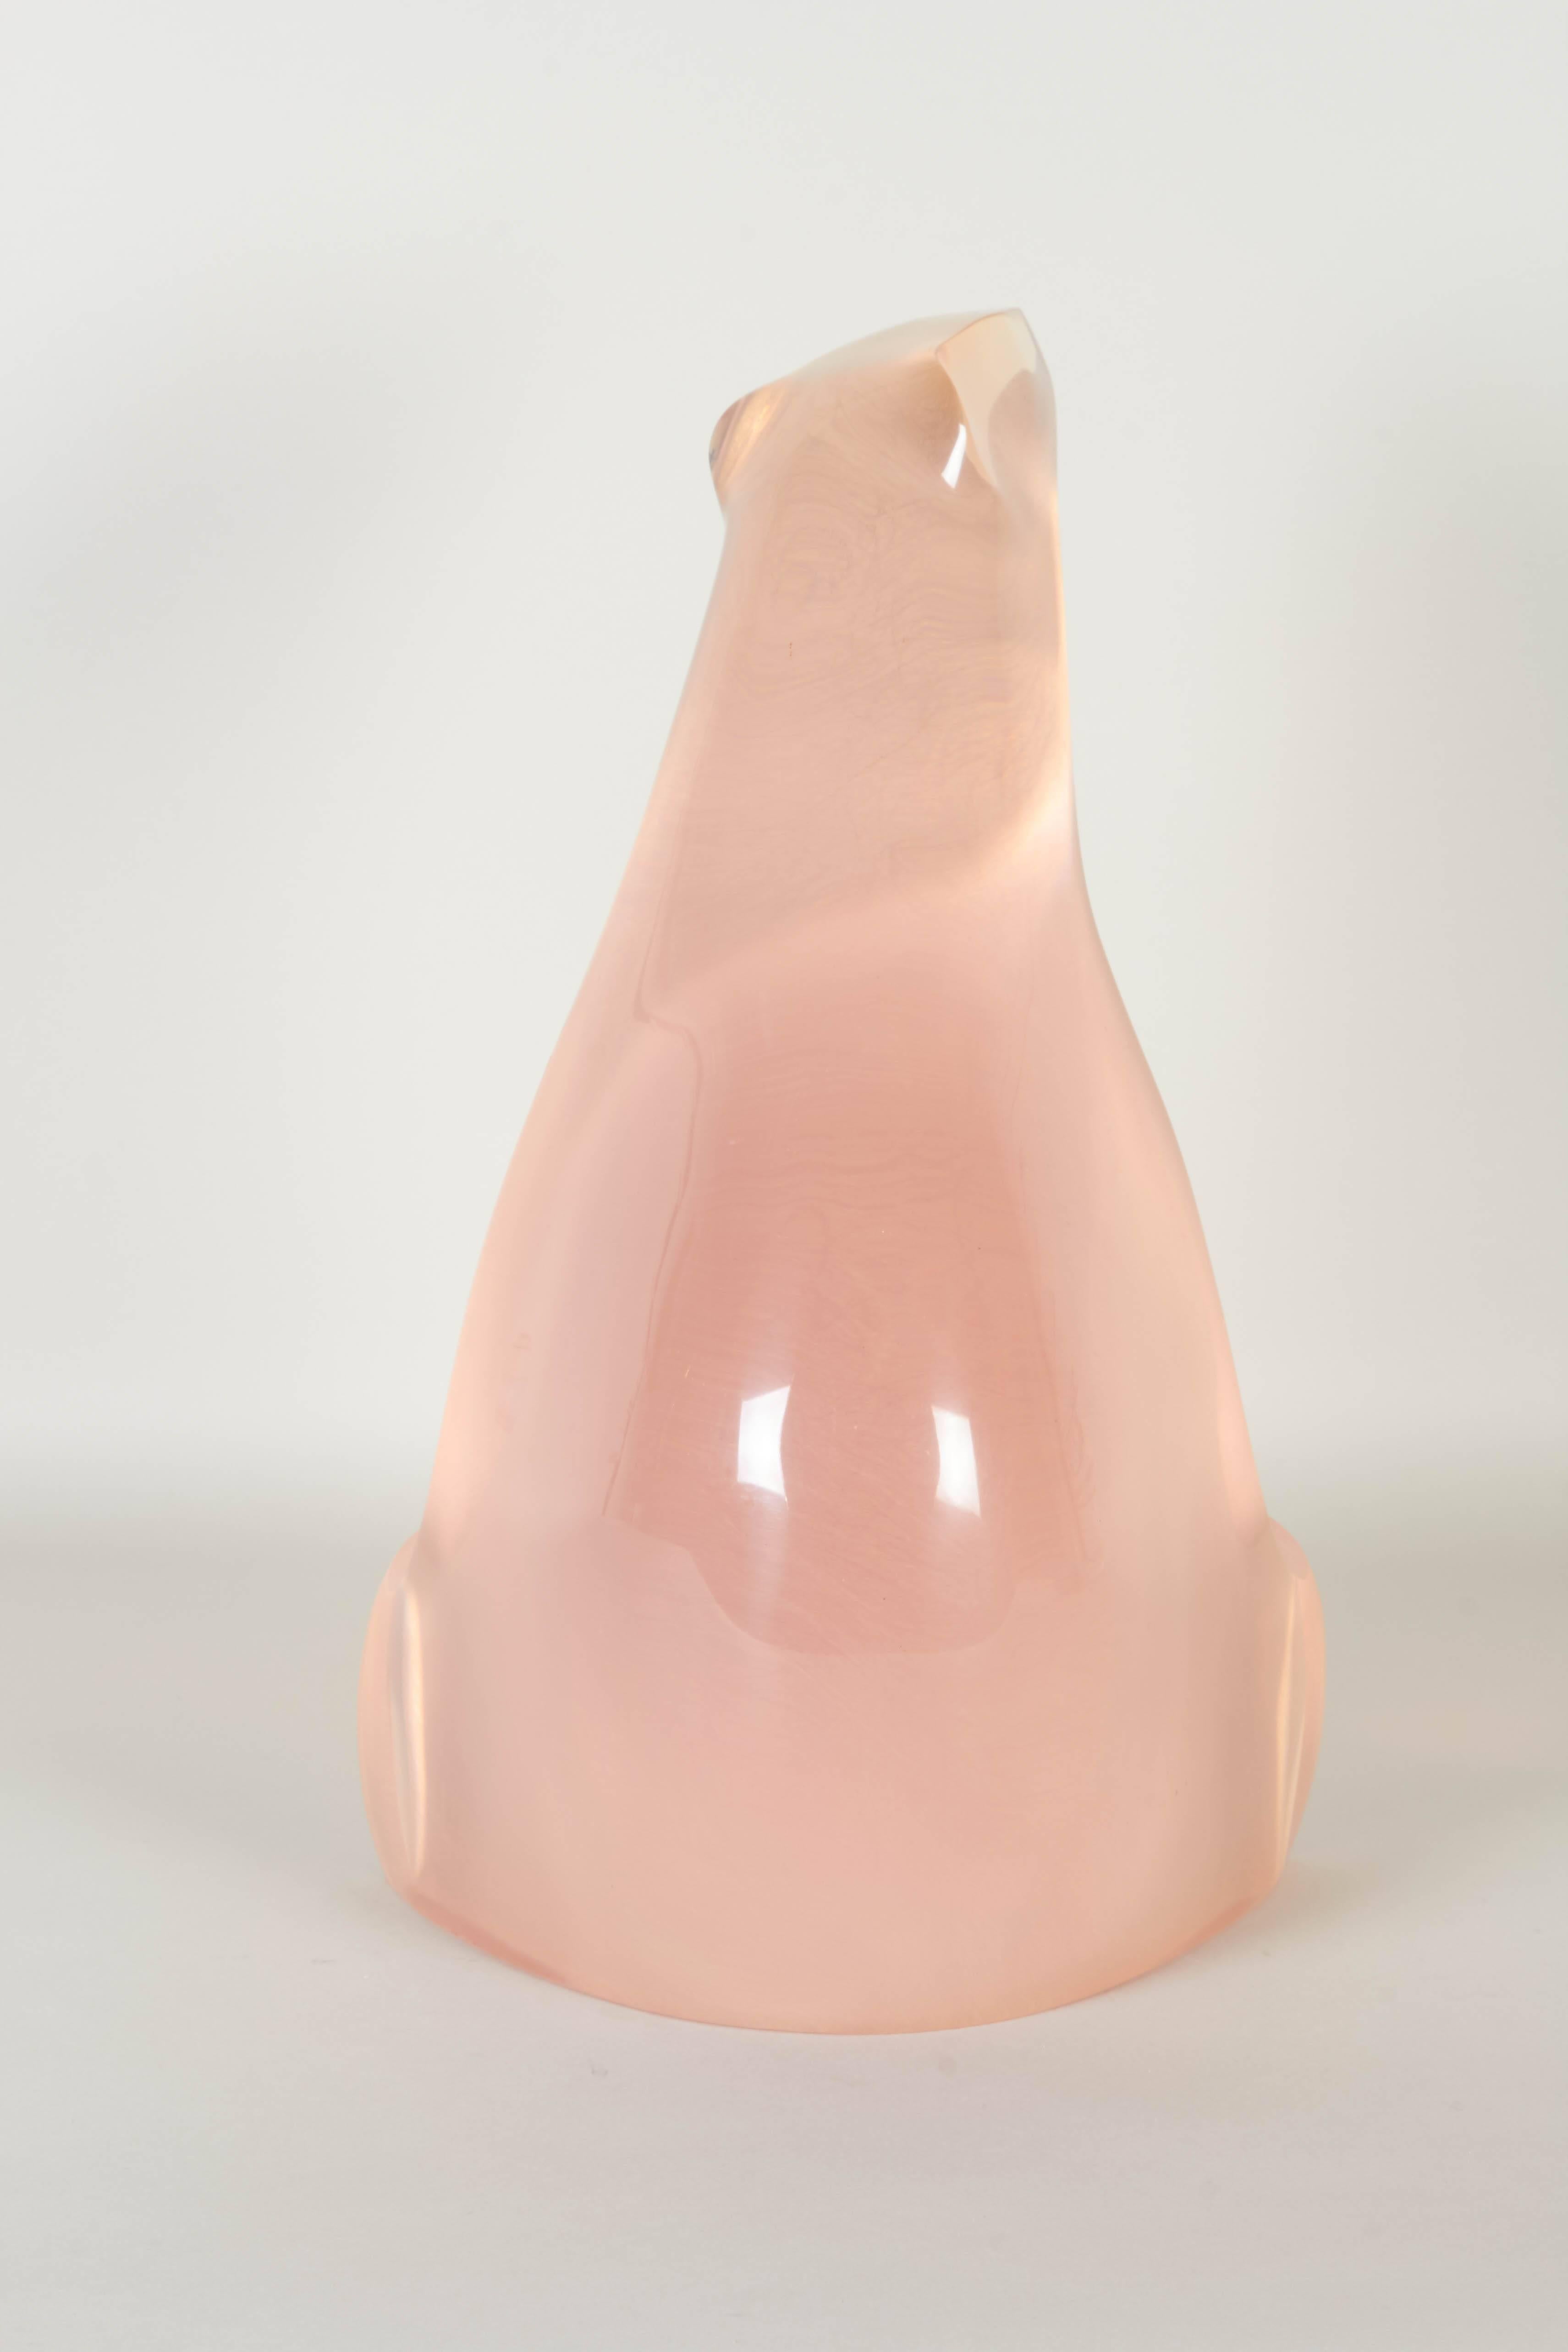 Louis Von Koelnau 'Seated Bear' in Pink Lucite, Signed and Dated In Excellent Condition In New York, NY